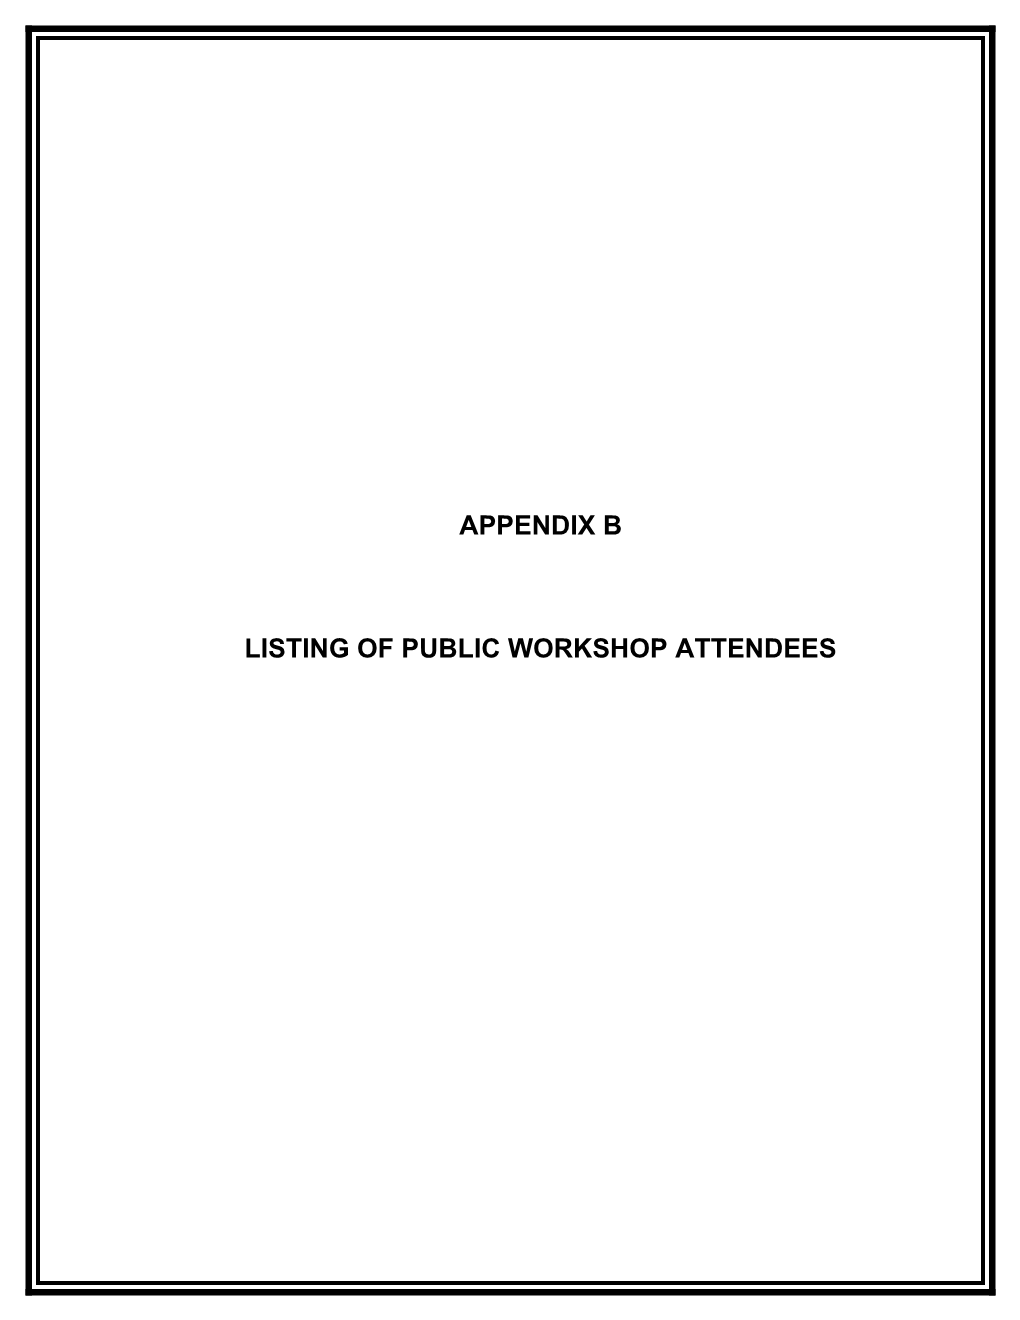 Listing of Public Workshop Attendees